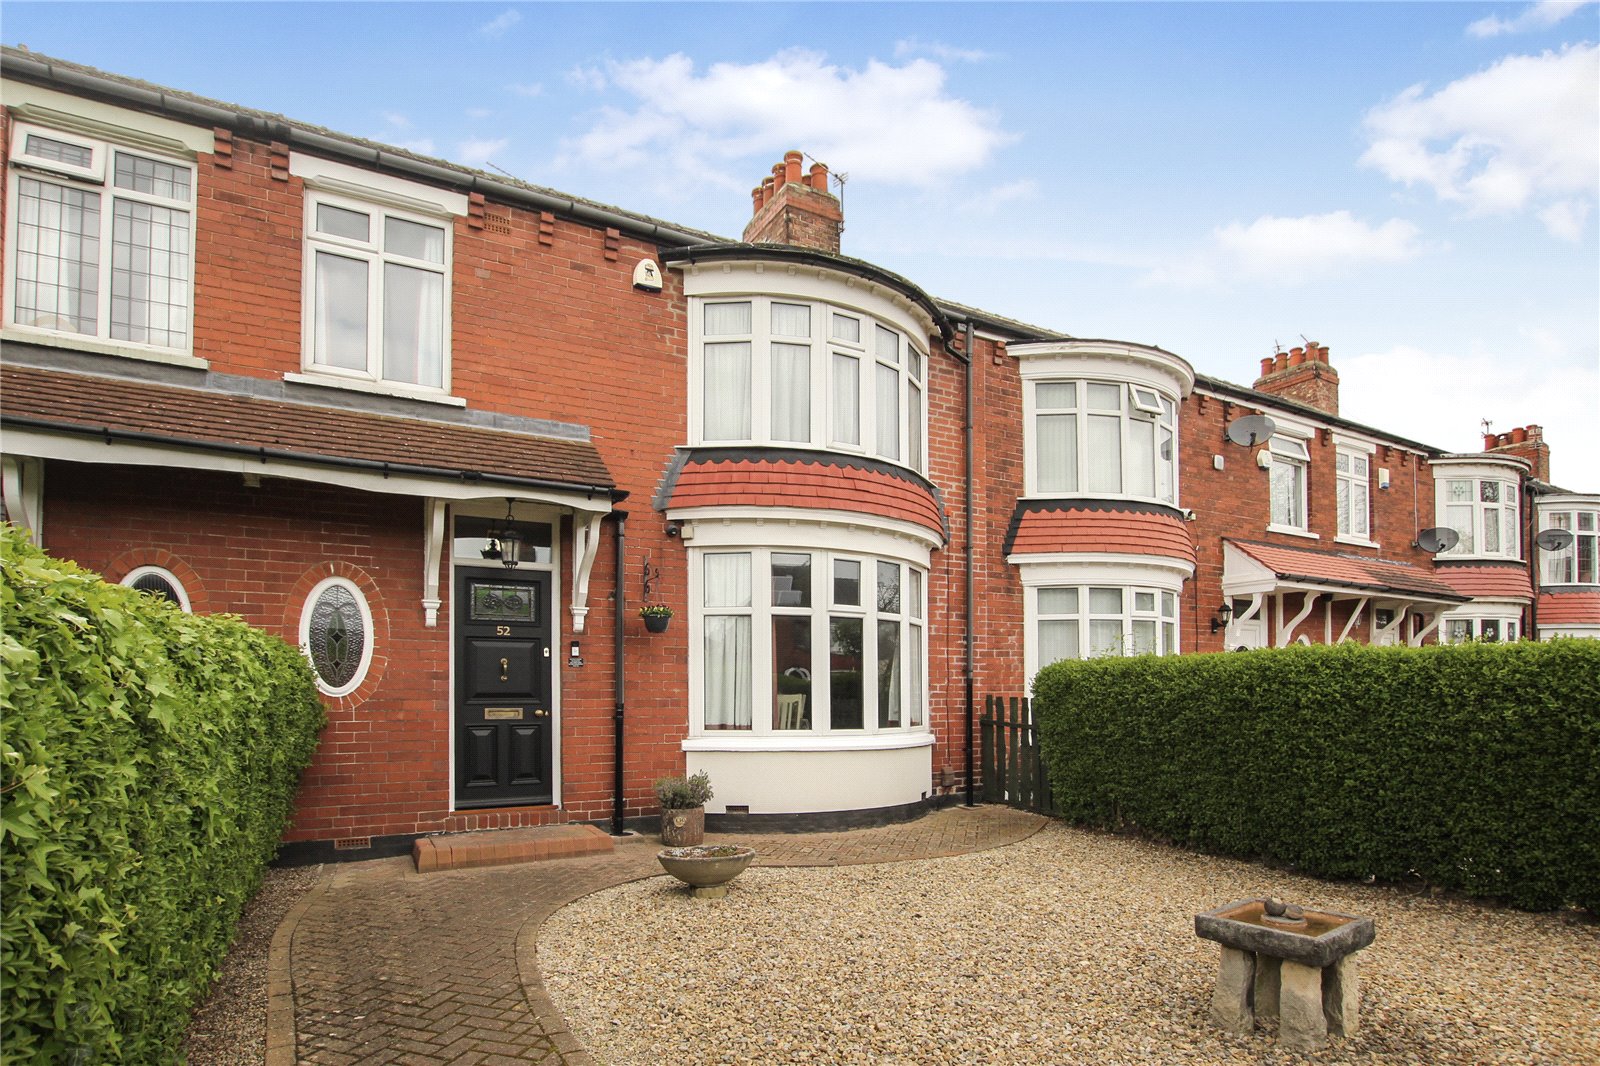 4 bed house for sale in Thornfield Road, Linthorpe 1